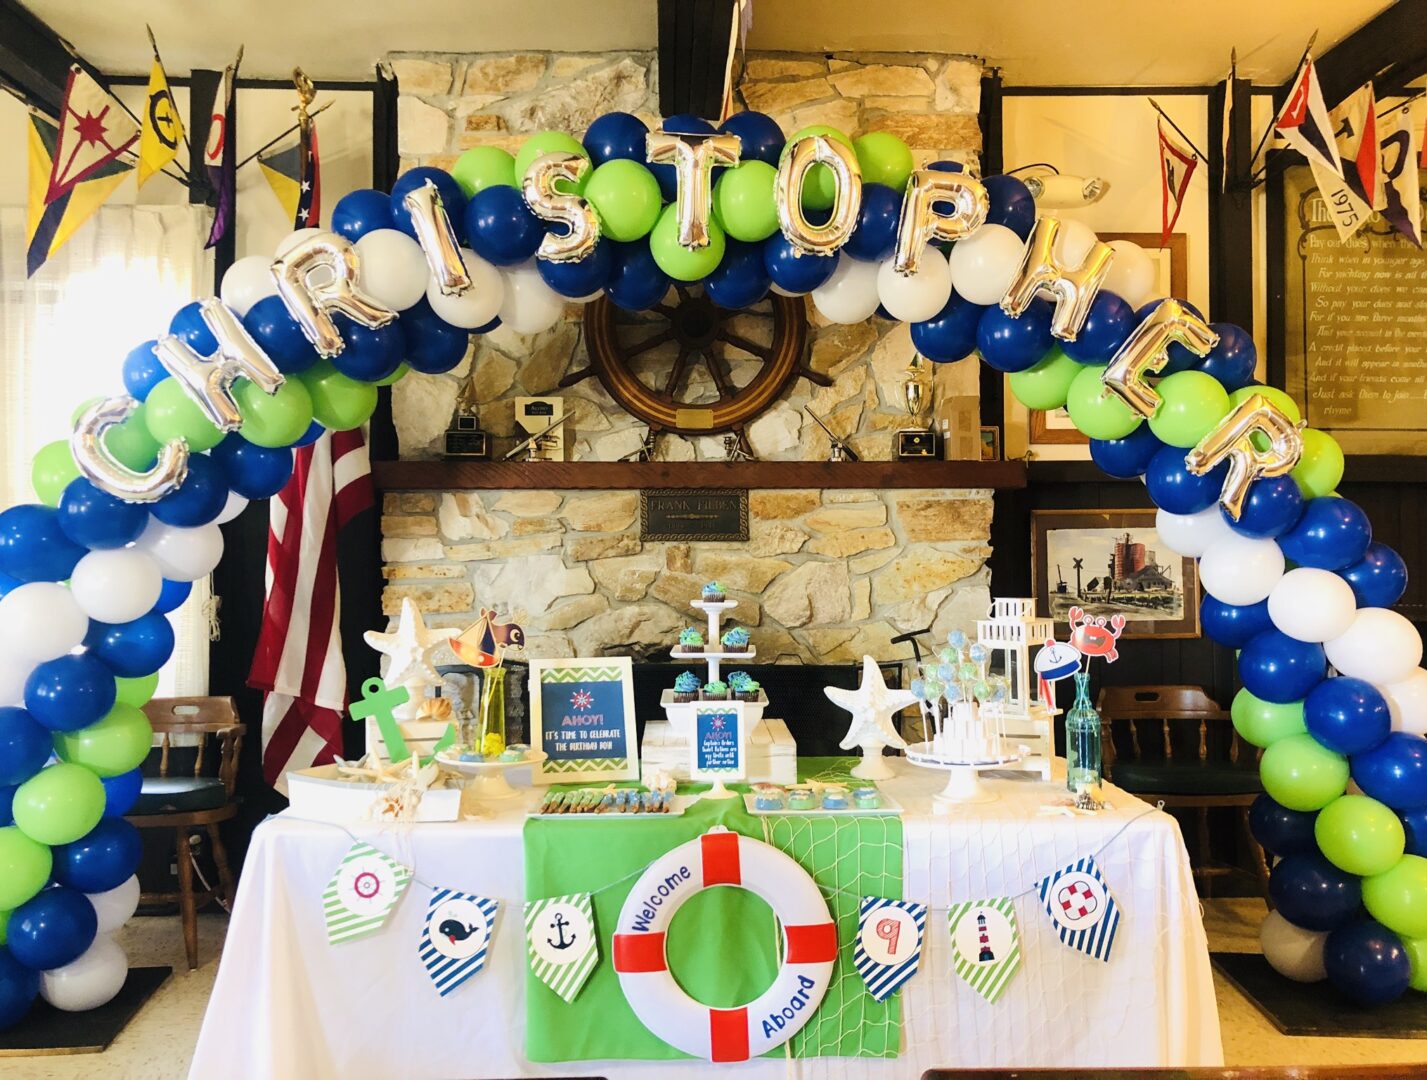 A table with decorations and balloons in the shape of boats.